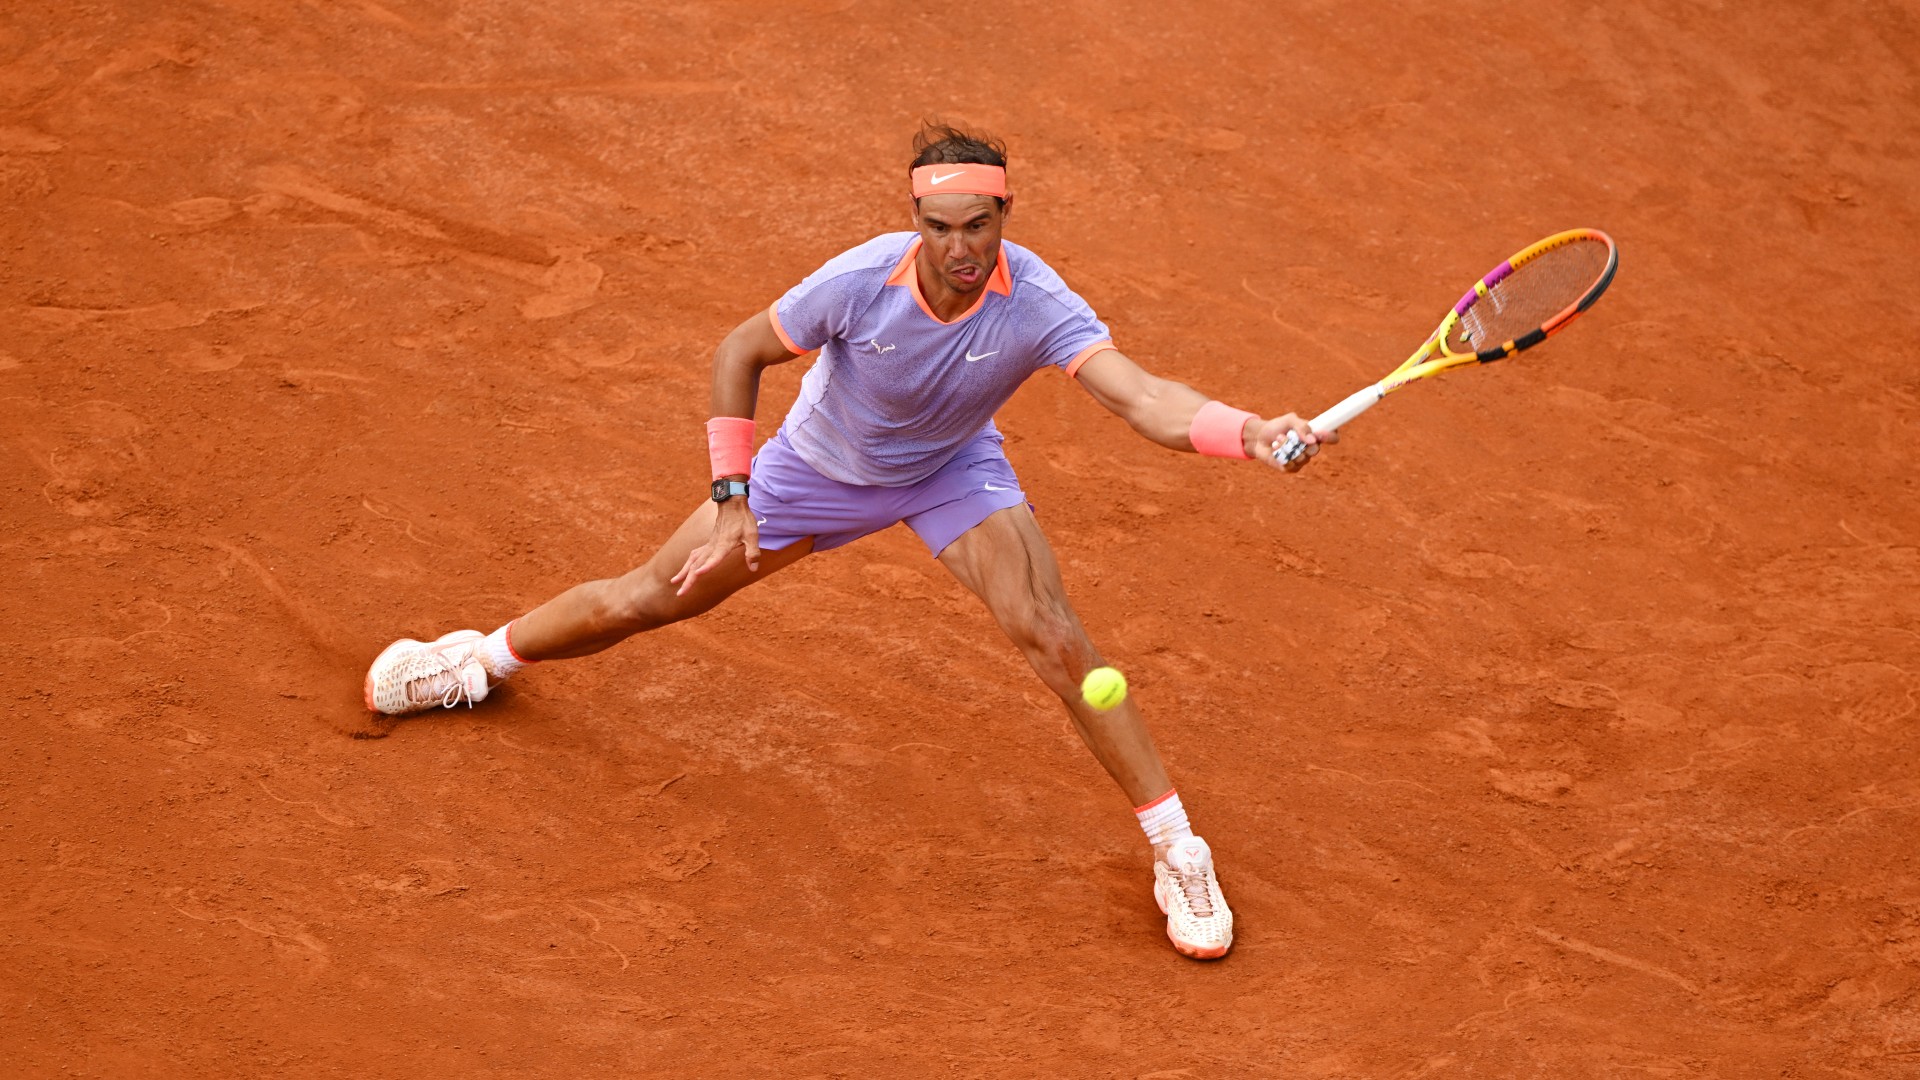 Nadal fights back to win in Rome